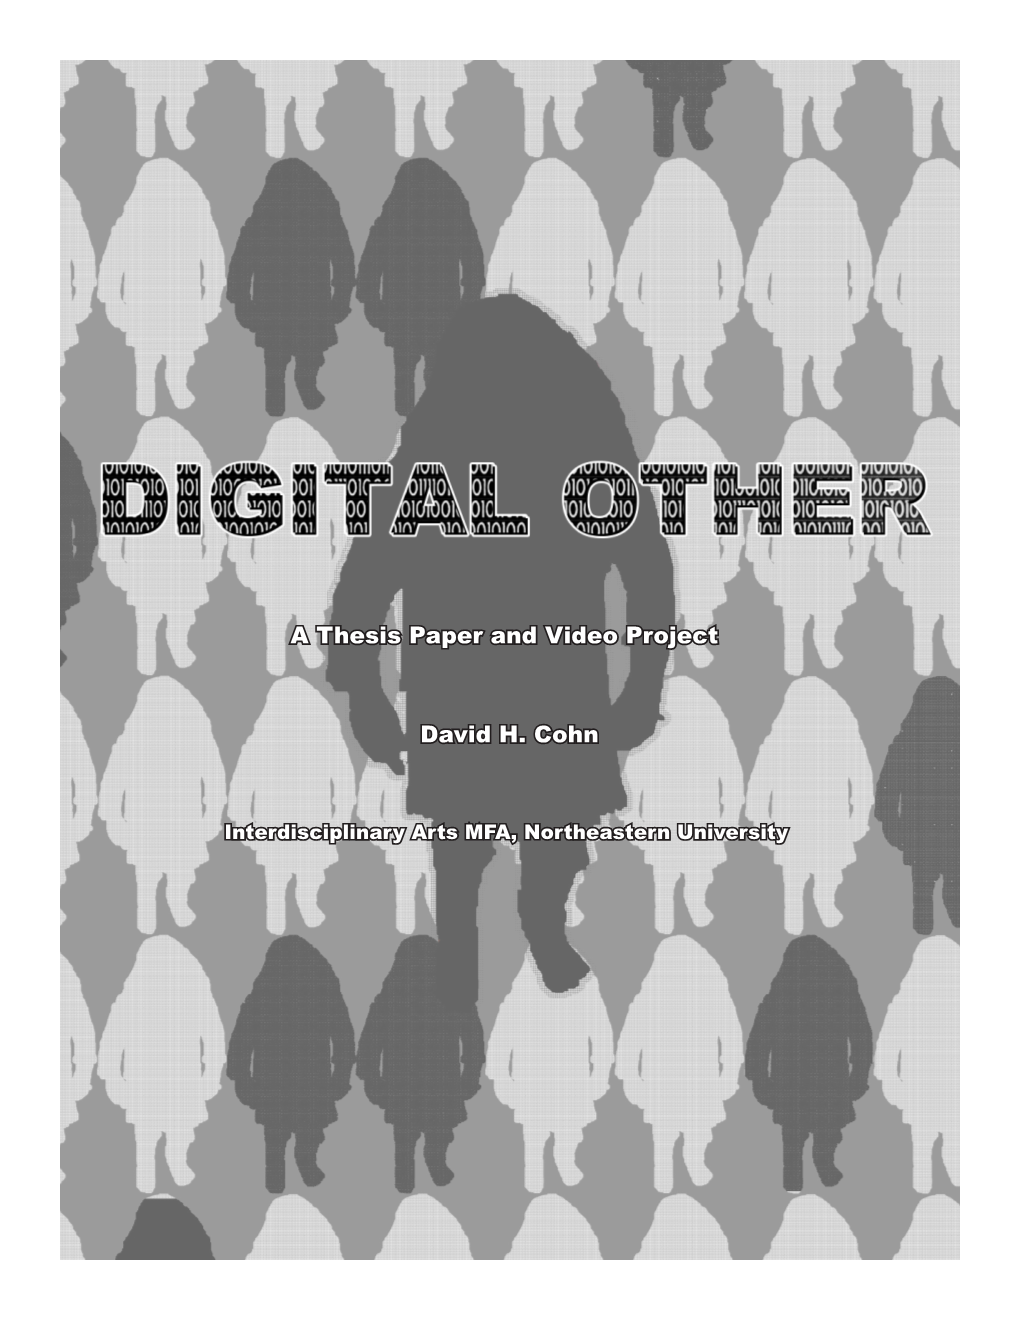 Digital Other Is a Combination Video Art Project and Thesis Paper That Addresses the Problems of Encountering Others and Mediating Oneself Through the Digital Screen